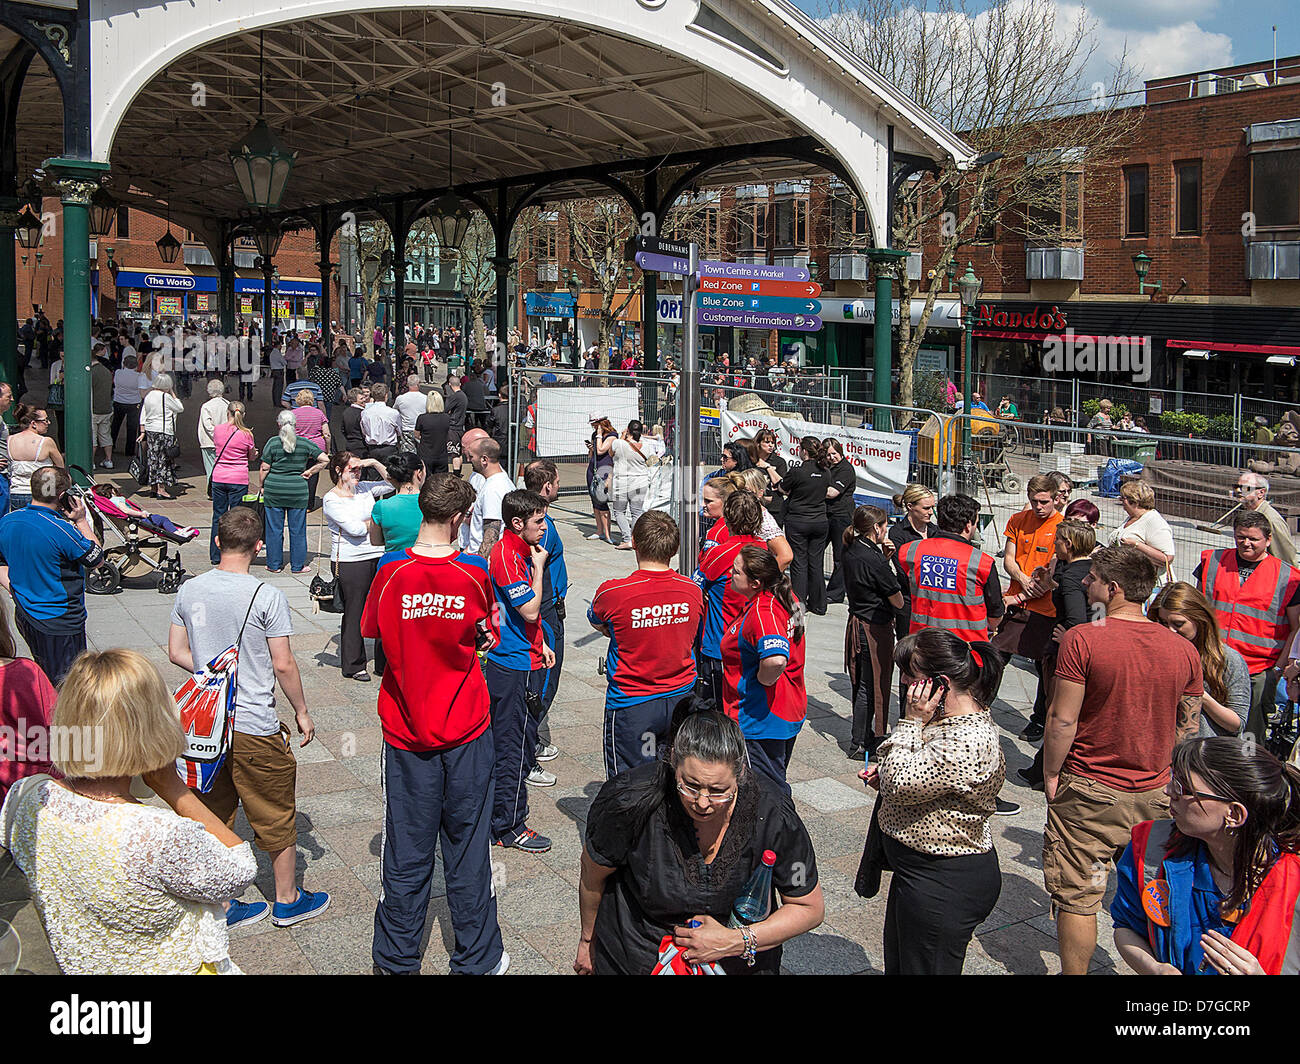 Warrington, UK. 7th May 2013. Warrington's 'Golden Square' shopping centre and all the shops around it was closed this morning due to a suspected bomb scare. All staff and customers were waiting in the 'Old Fish Market' outside. Credit:  John Hopkins / Alamy Live News Stock Photo